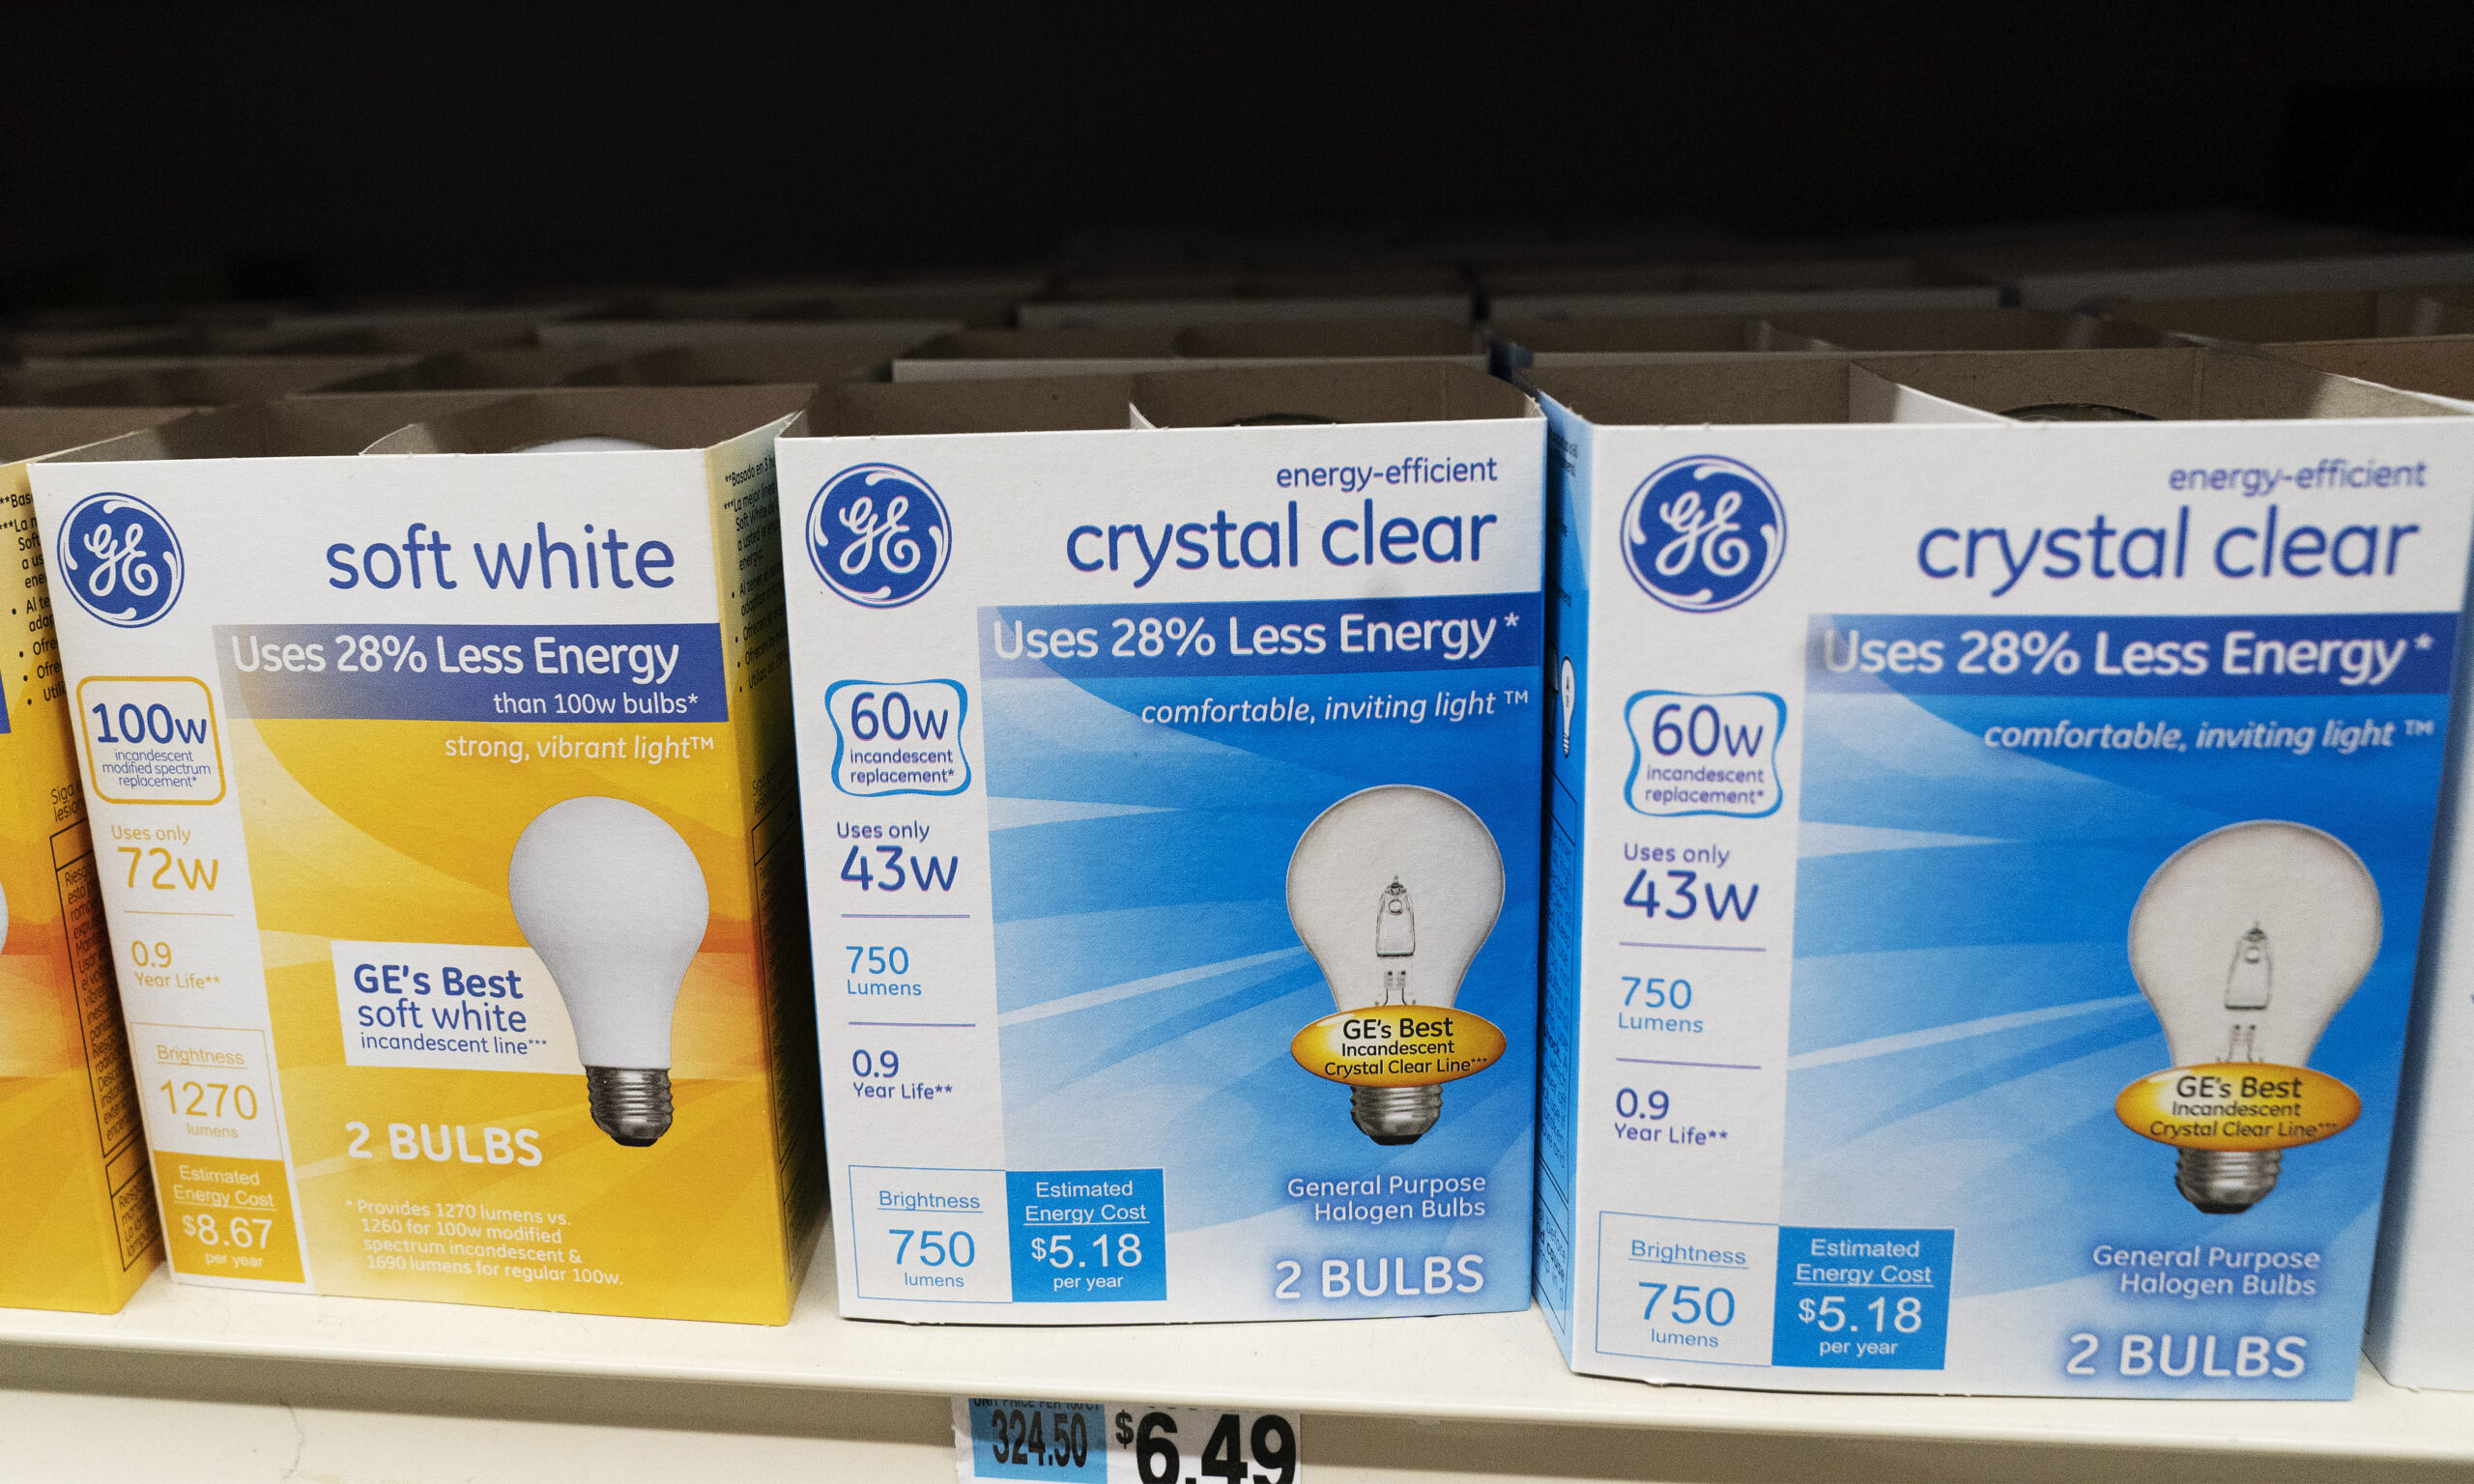 FILE - General Electric light bulbs are displayed in a supermarket April 5, 2021 in New York. The Biden administration is scrapping old-fashioned incandescent light bulbs. Rules finalized by the Energy Department will require manufacturers to sell energy-efficient lightbulbs, accelerating a longtime industry practice to use compact fluorescent and LED bulbs that last 25 to 50 times longer than incandescent bulbs. (AP Photo/Mark Lennihan, File)